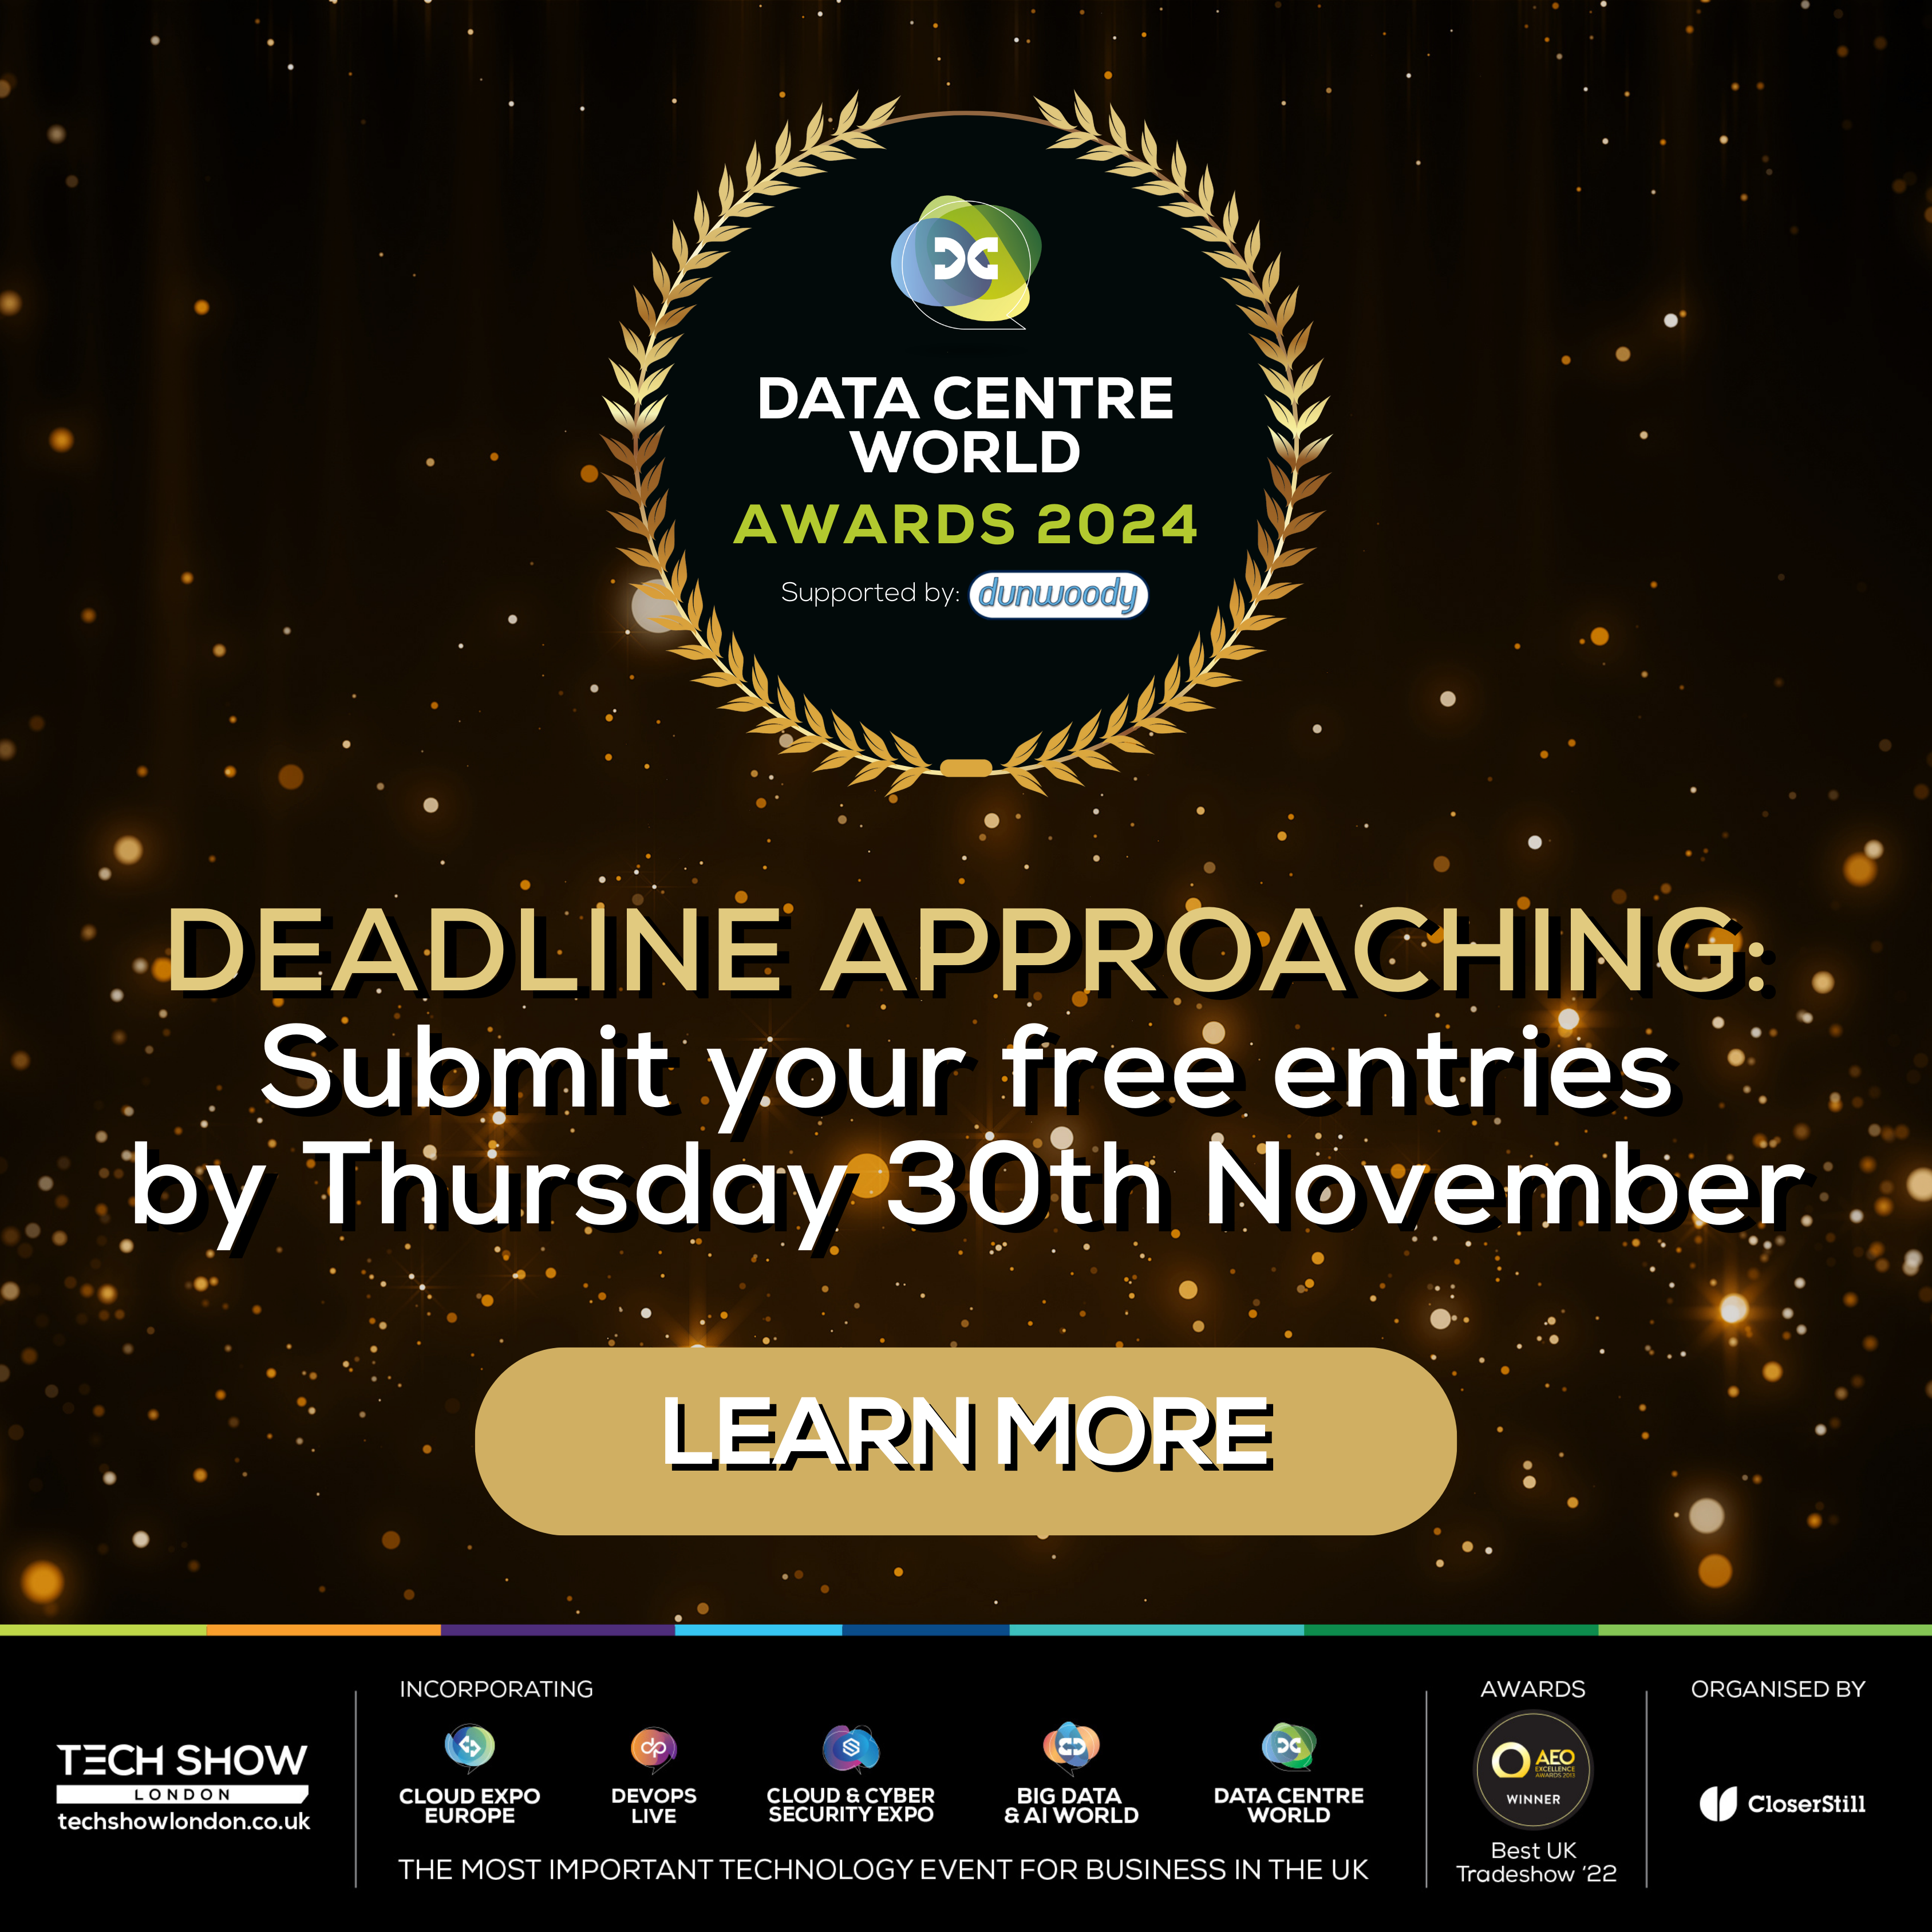 DEADLINE APPROACHING: Submit your free entries before Thursday 30th November for the DCW Awards 2024